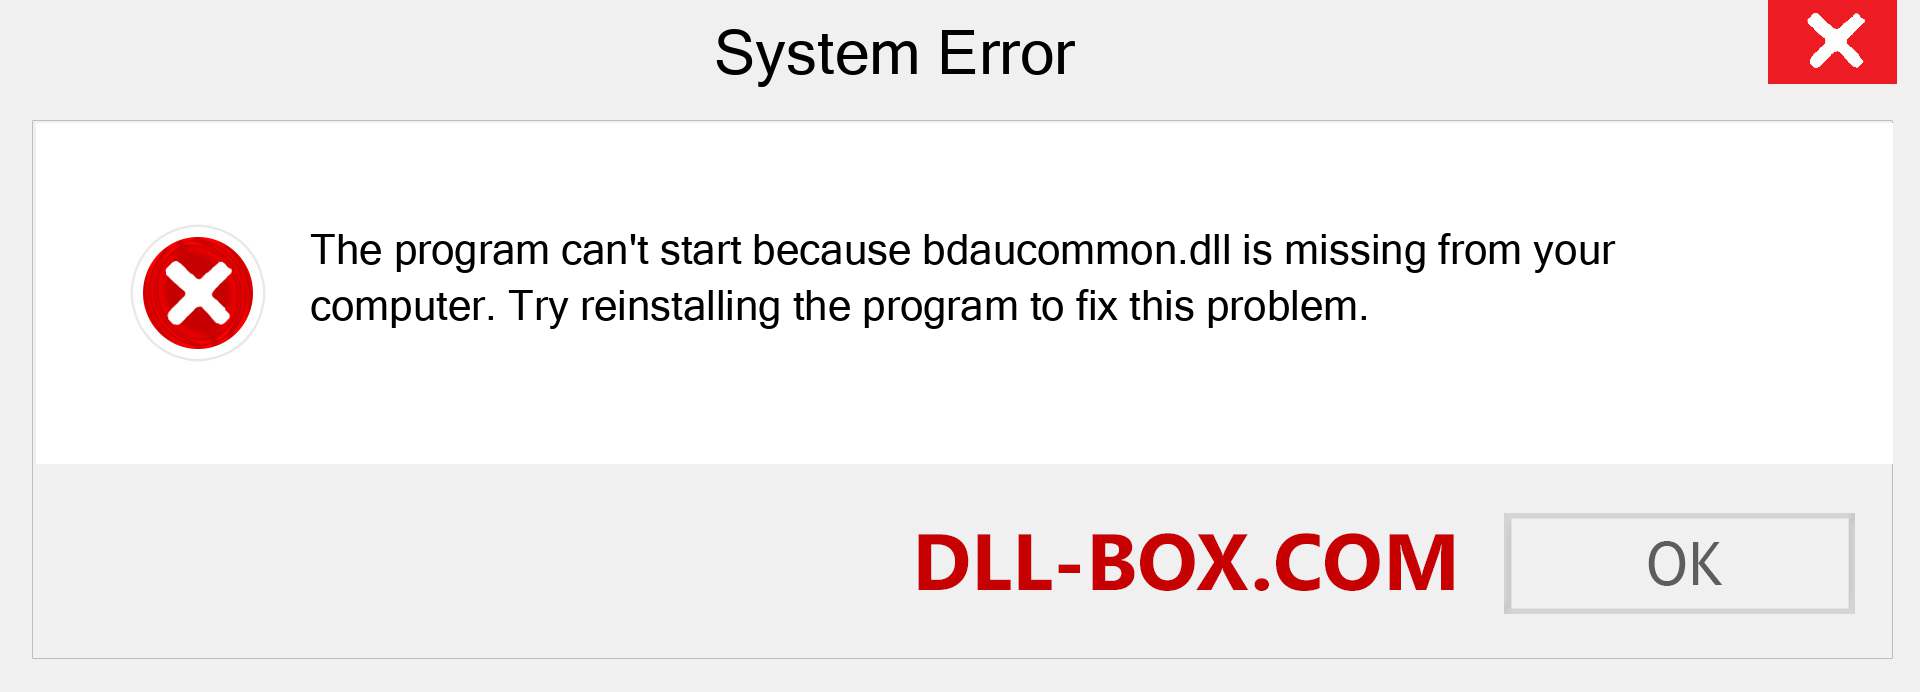  bdaucommon.dll file is missing?. Download for Windows 7, 8, 10 - Fix  bdaucommon dll Missing Error on Windows, photos, images